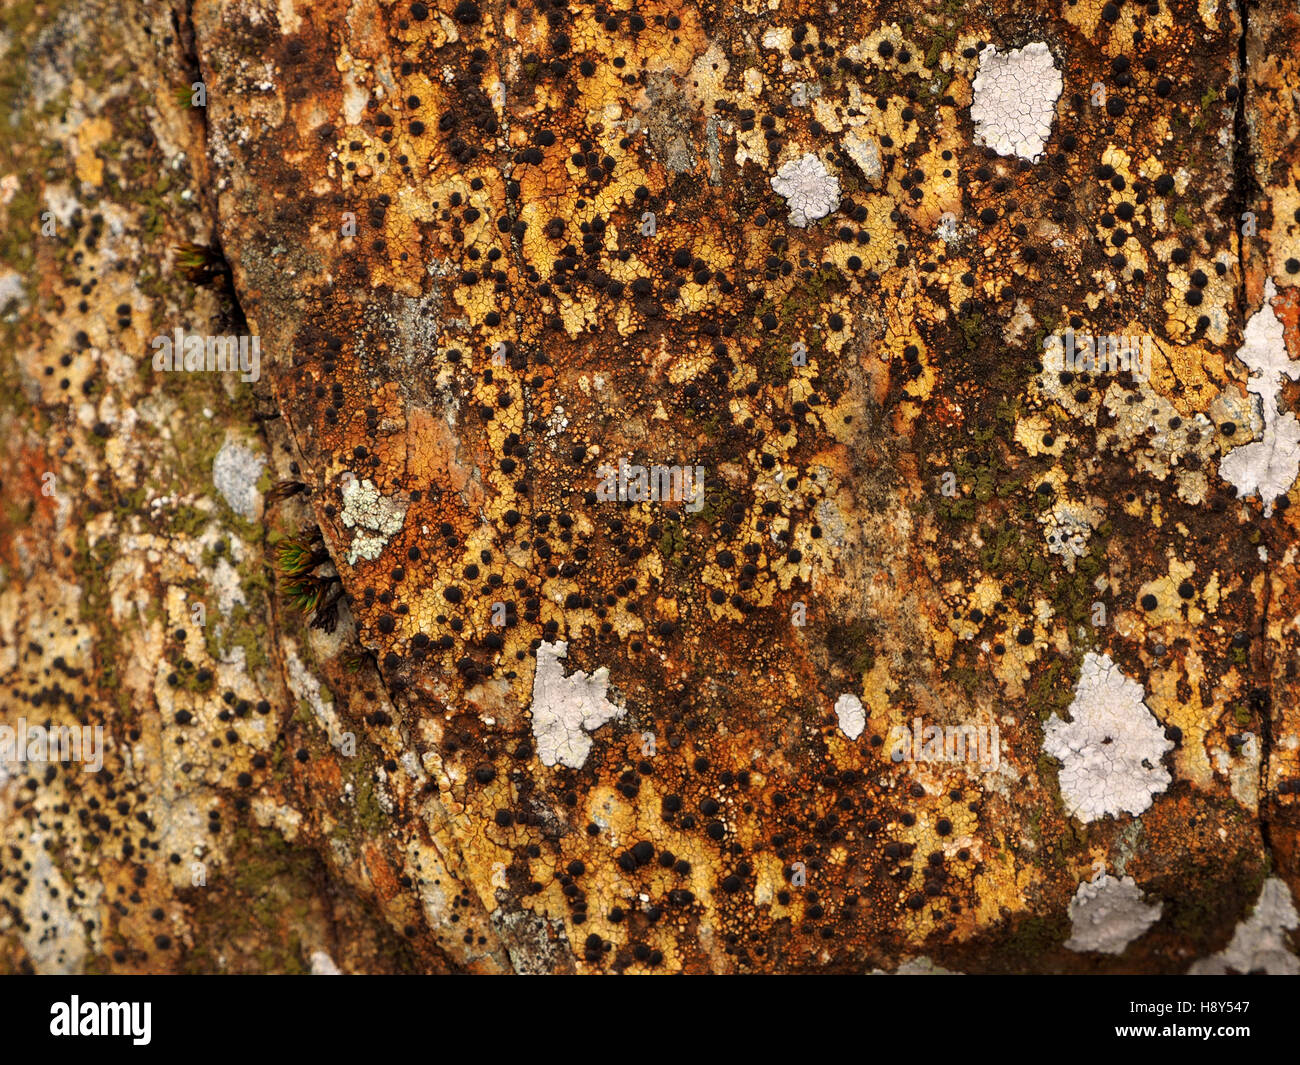 Orange & brown crustose lichen with black apothecia colonising rock with associated white lichens create interesting pattern Stock Photo